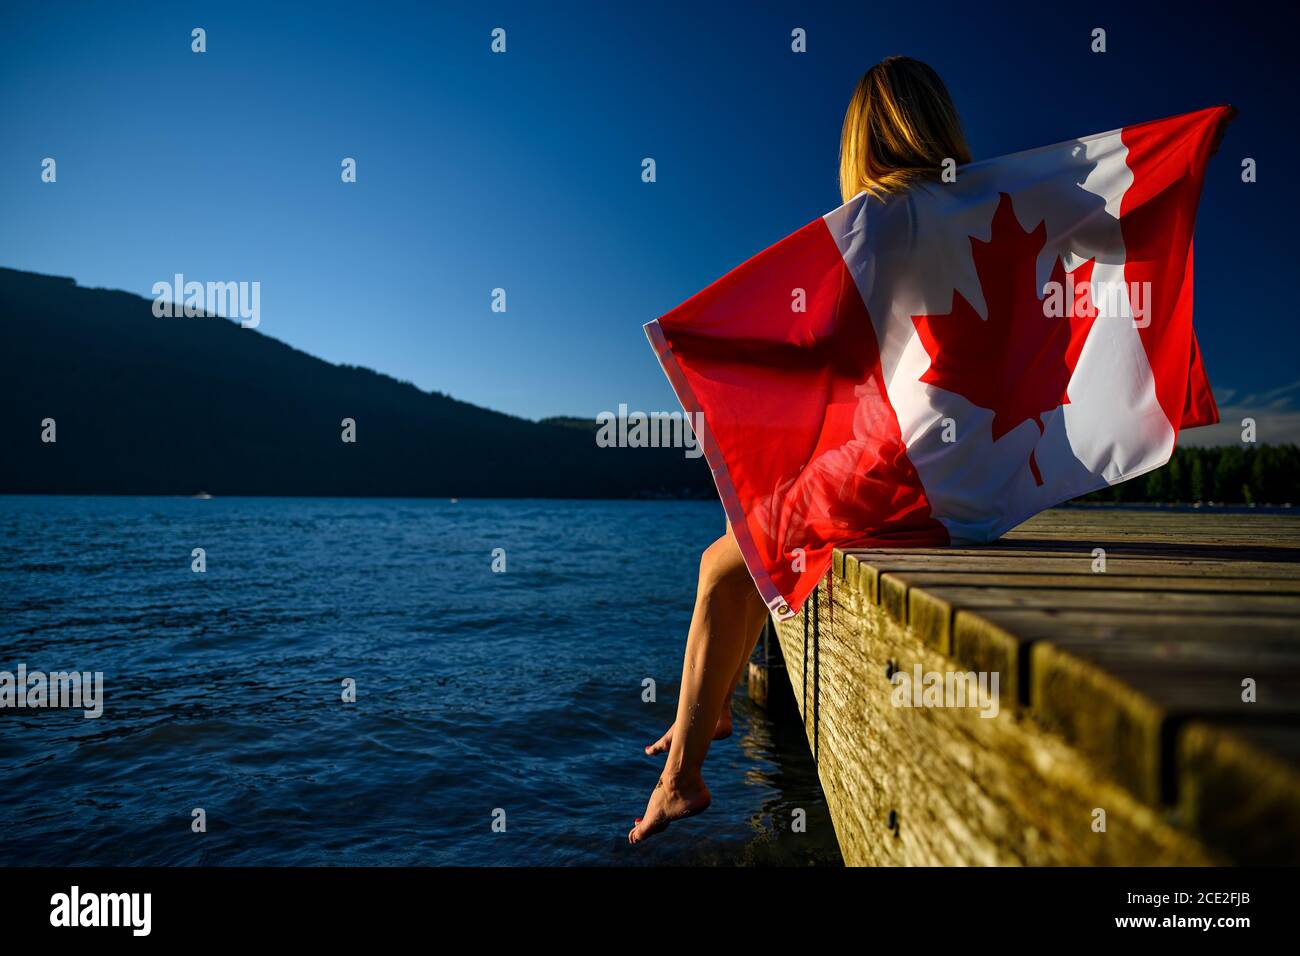 Summer scene of the Cultus Lake with a patriot woman in the foreground holding up a Canadian flag. Chilliwack, British Columbia, Canada Stock Photo